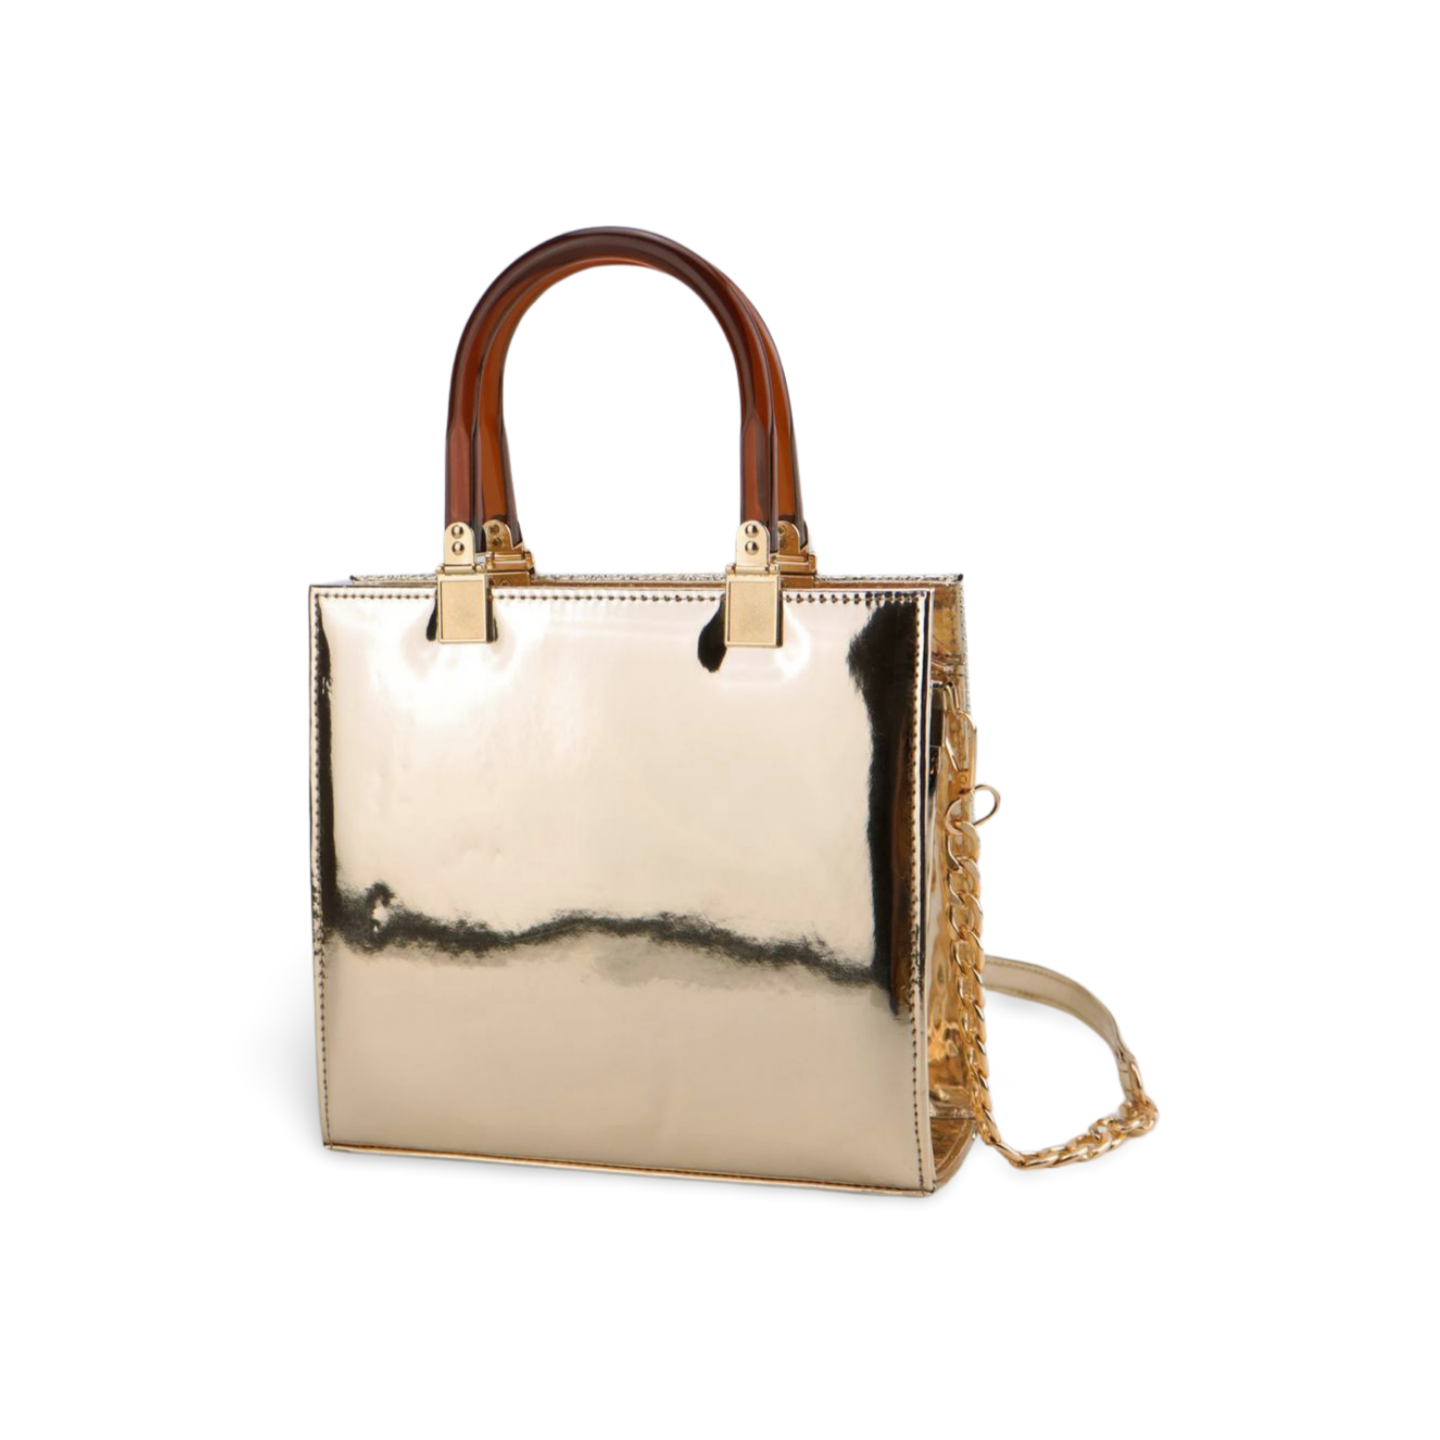 Stylish Crock Skin Handbag with Wooden Style Handles and Chain Strap